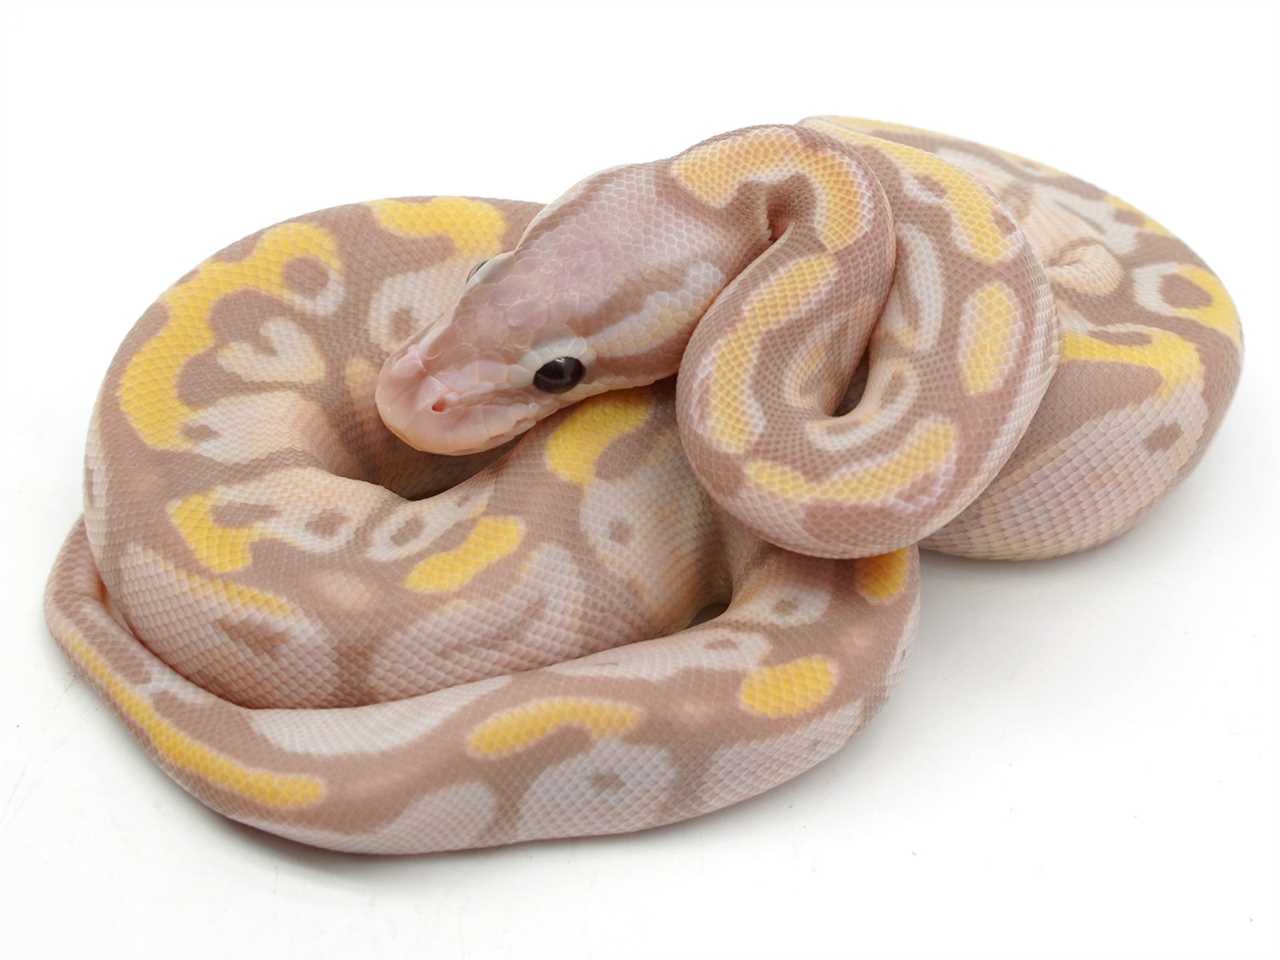 Appearance of the Coral Glow Ball Python